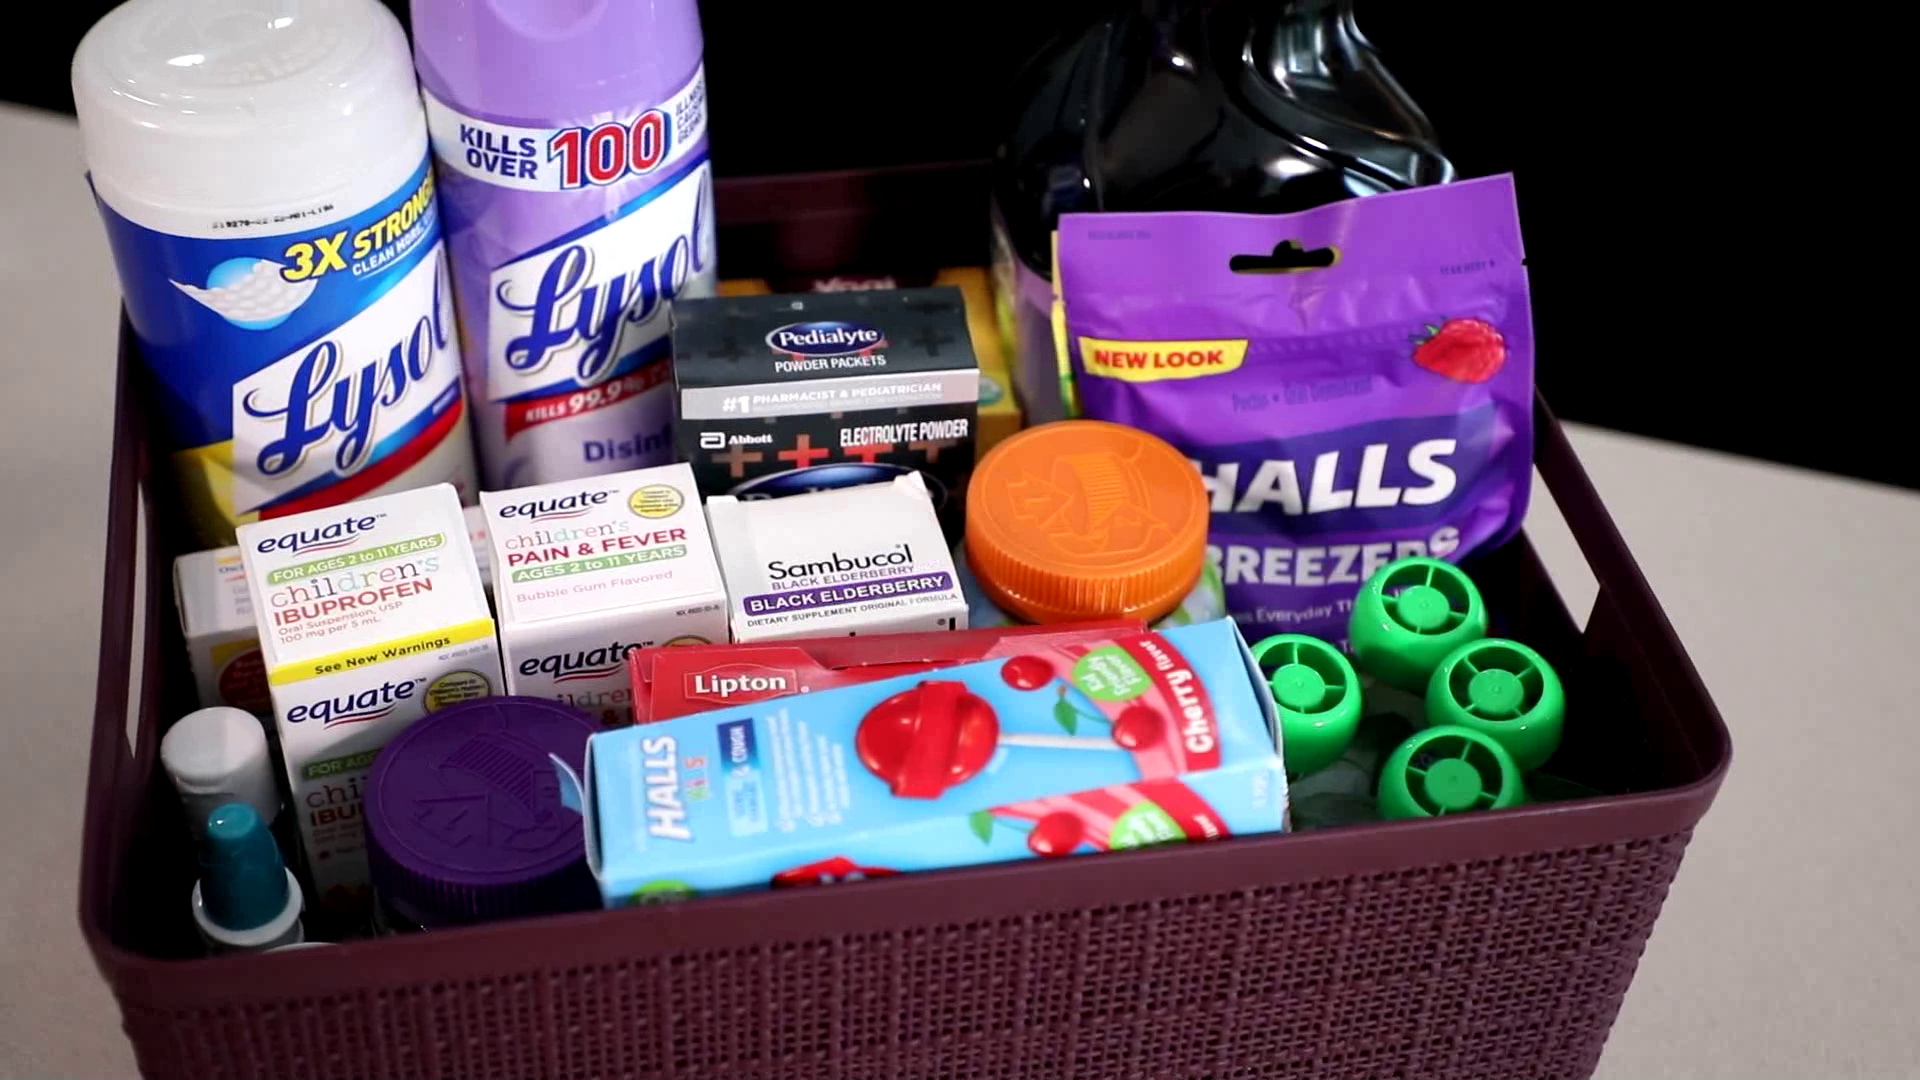 Must Haves For Mom's Winter Cold and Flu Survival Kit - Life With Lisa